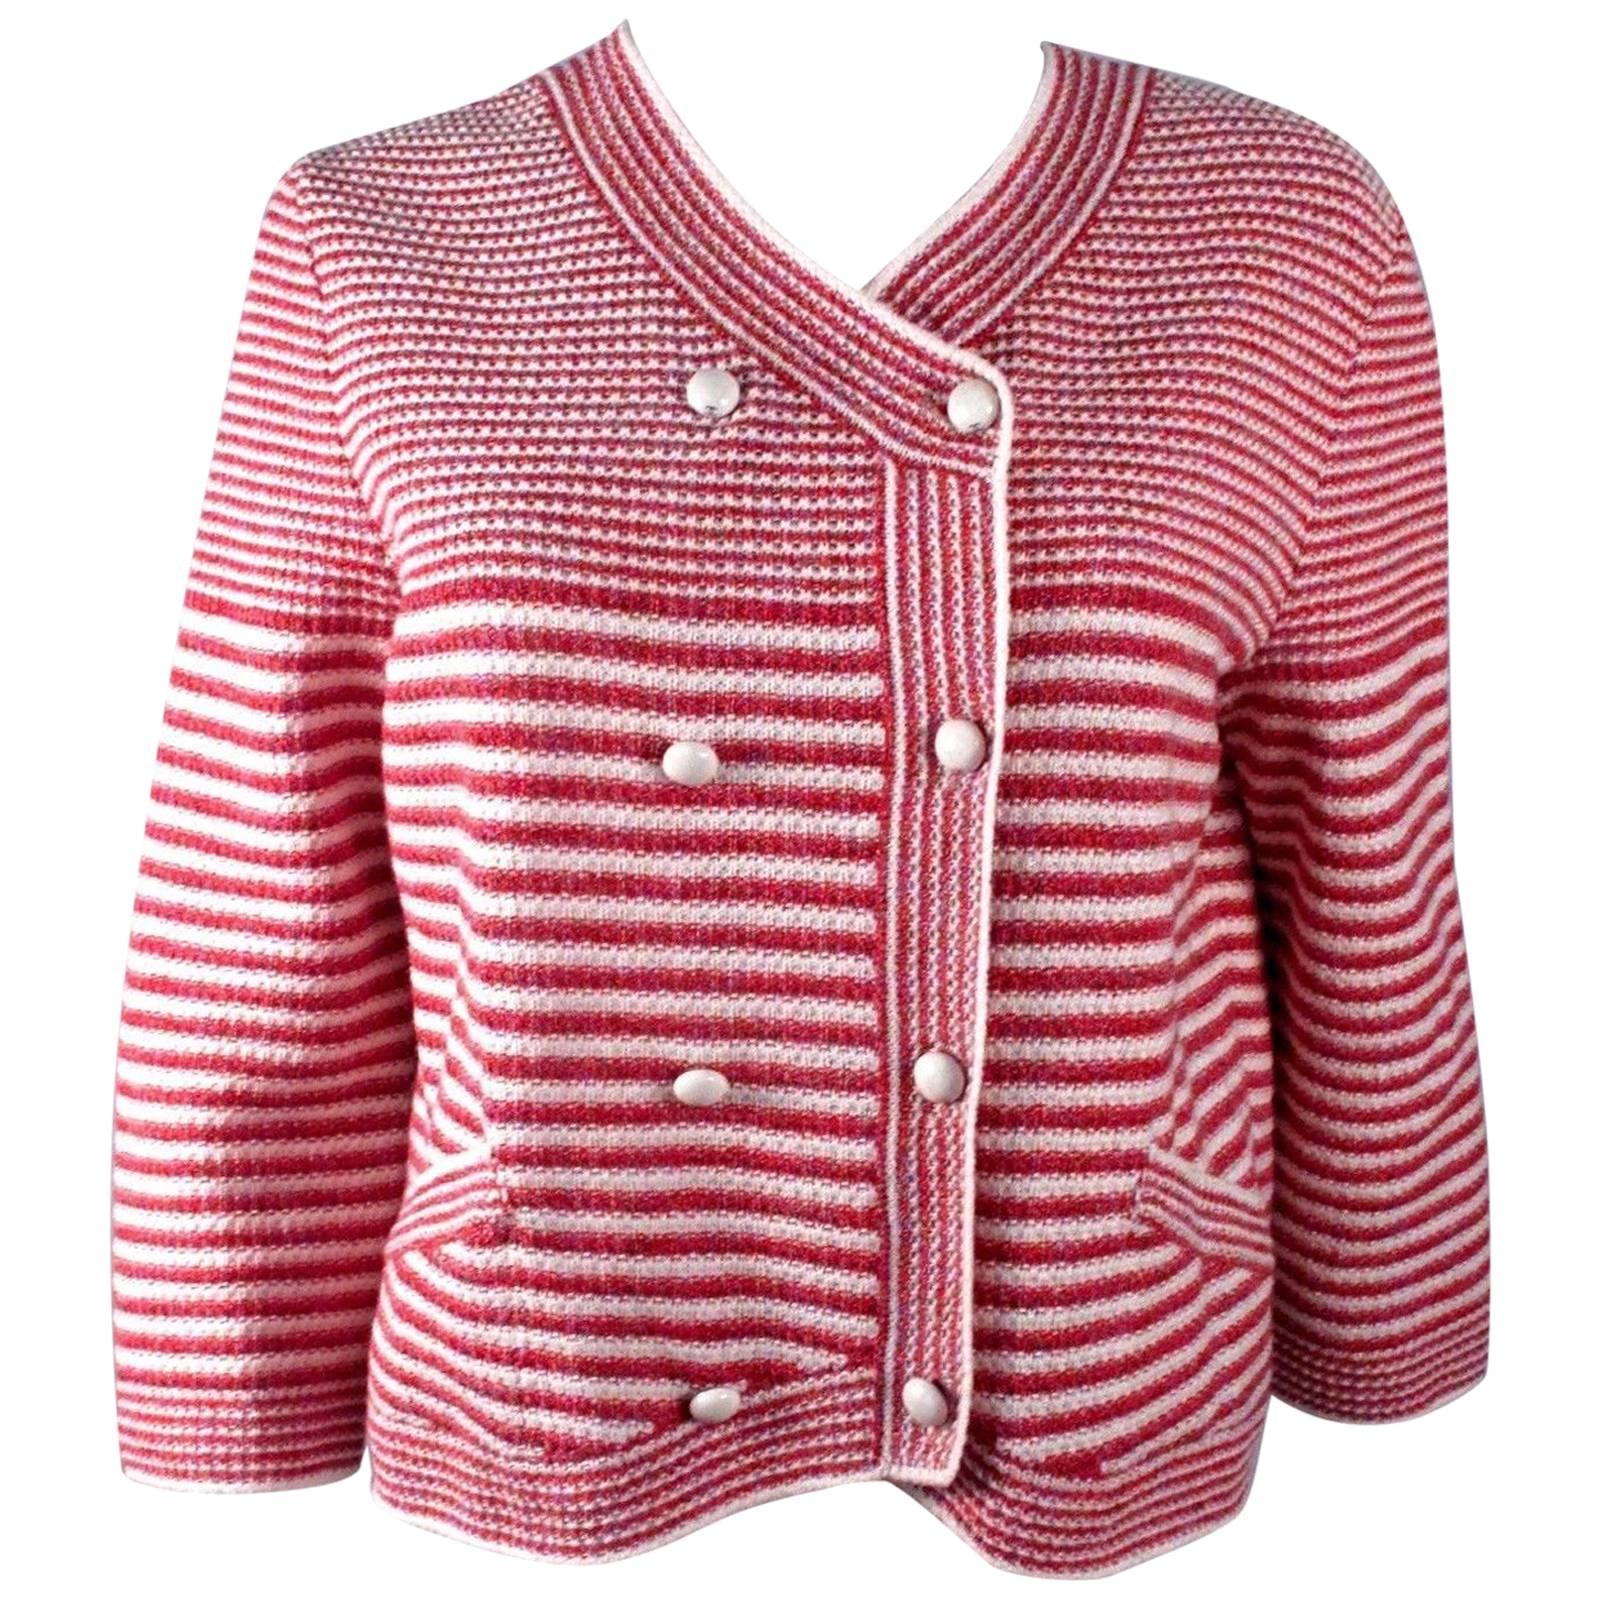 Chanel 2014 Pearl Jacket Cardigan - US 10 / 12 - 44 - Striped Red White Coat CC